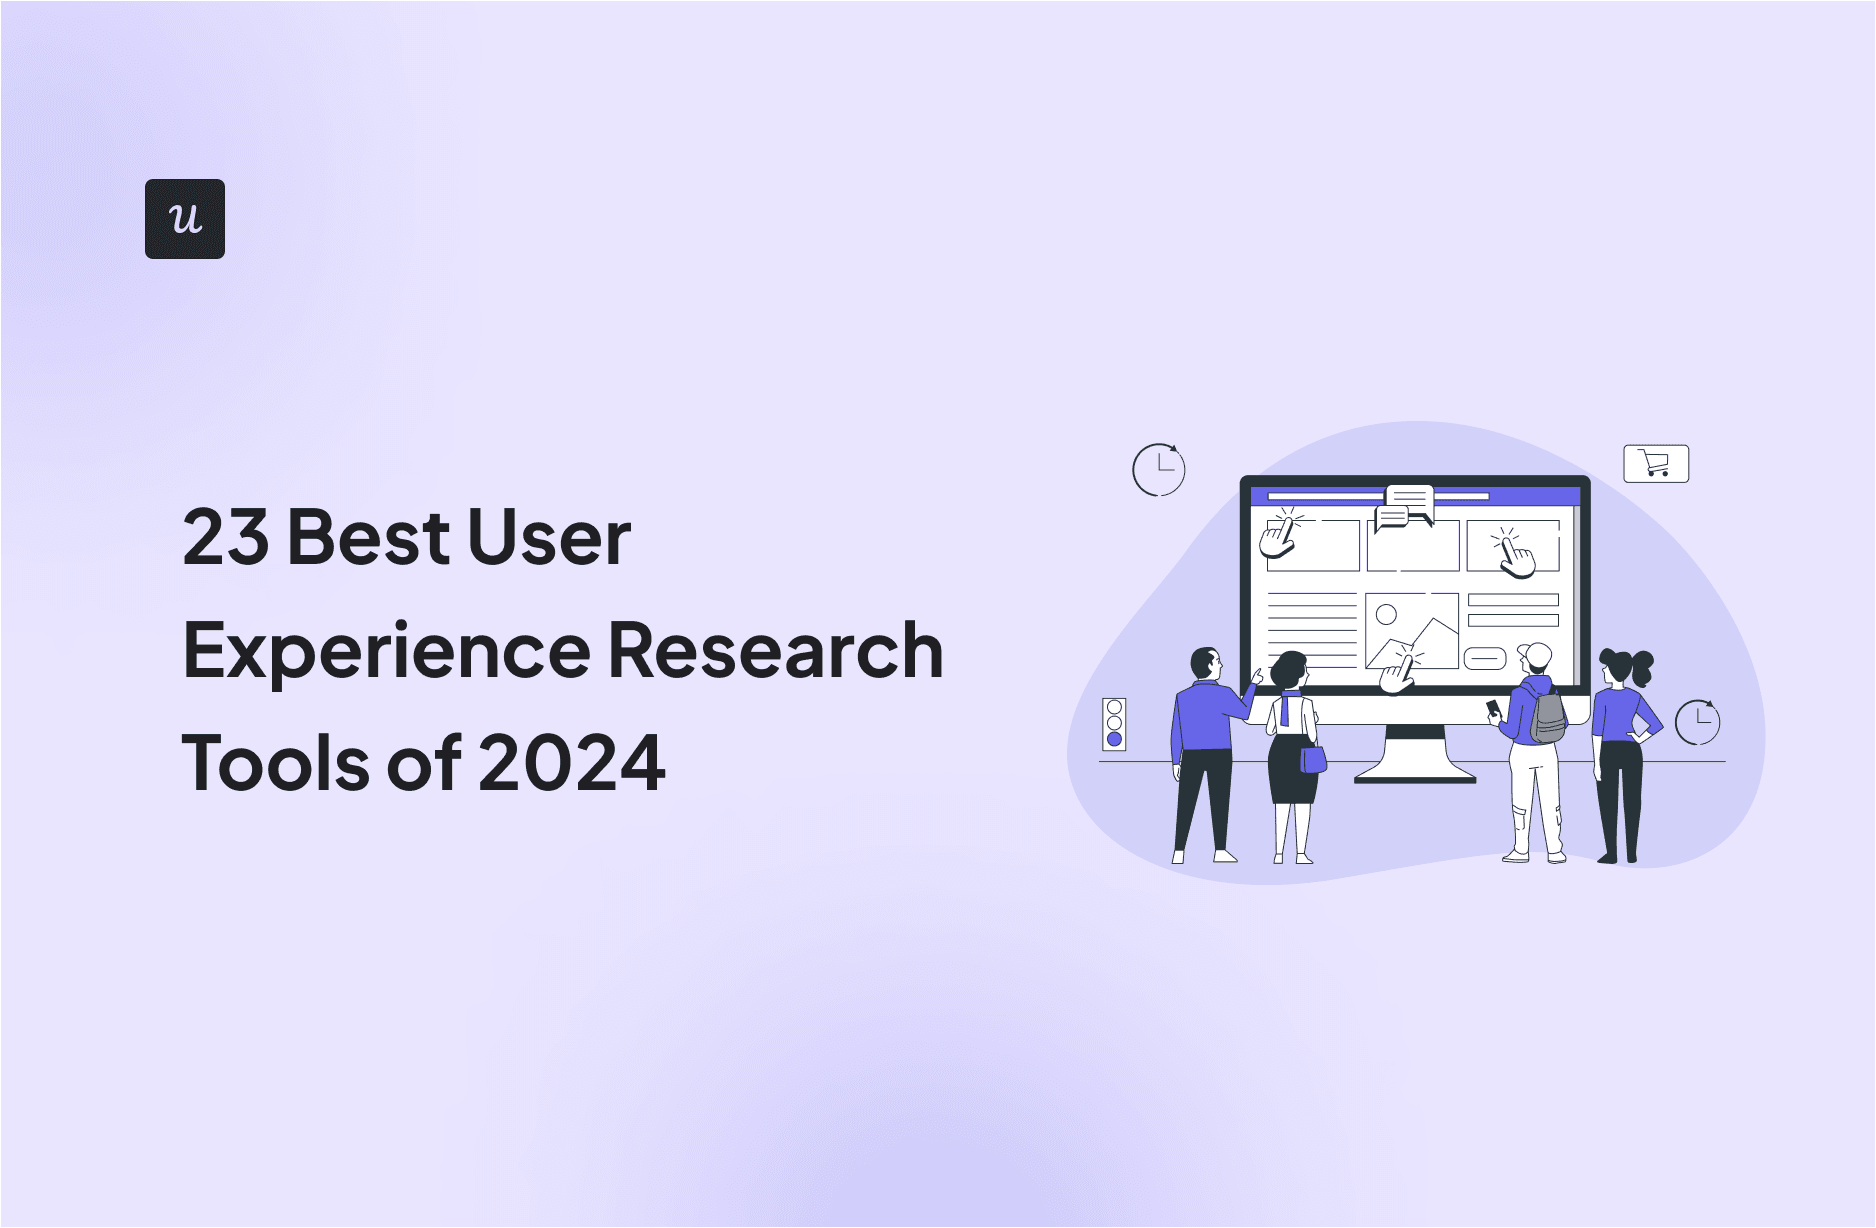 23 Best User Experience Research Tools of 2024 cover